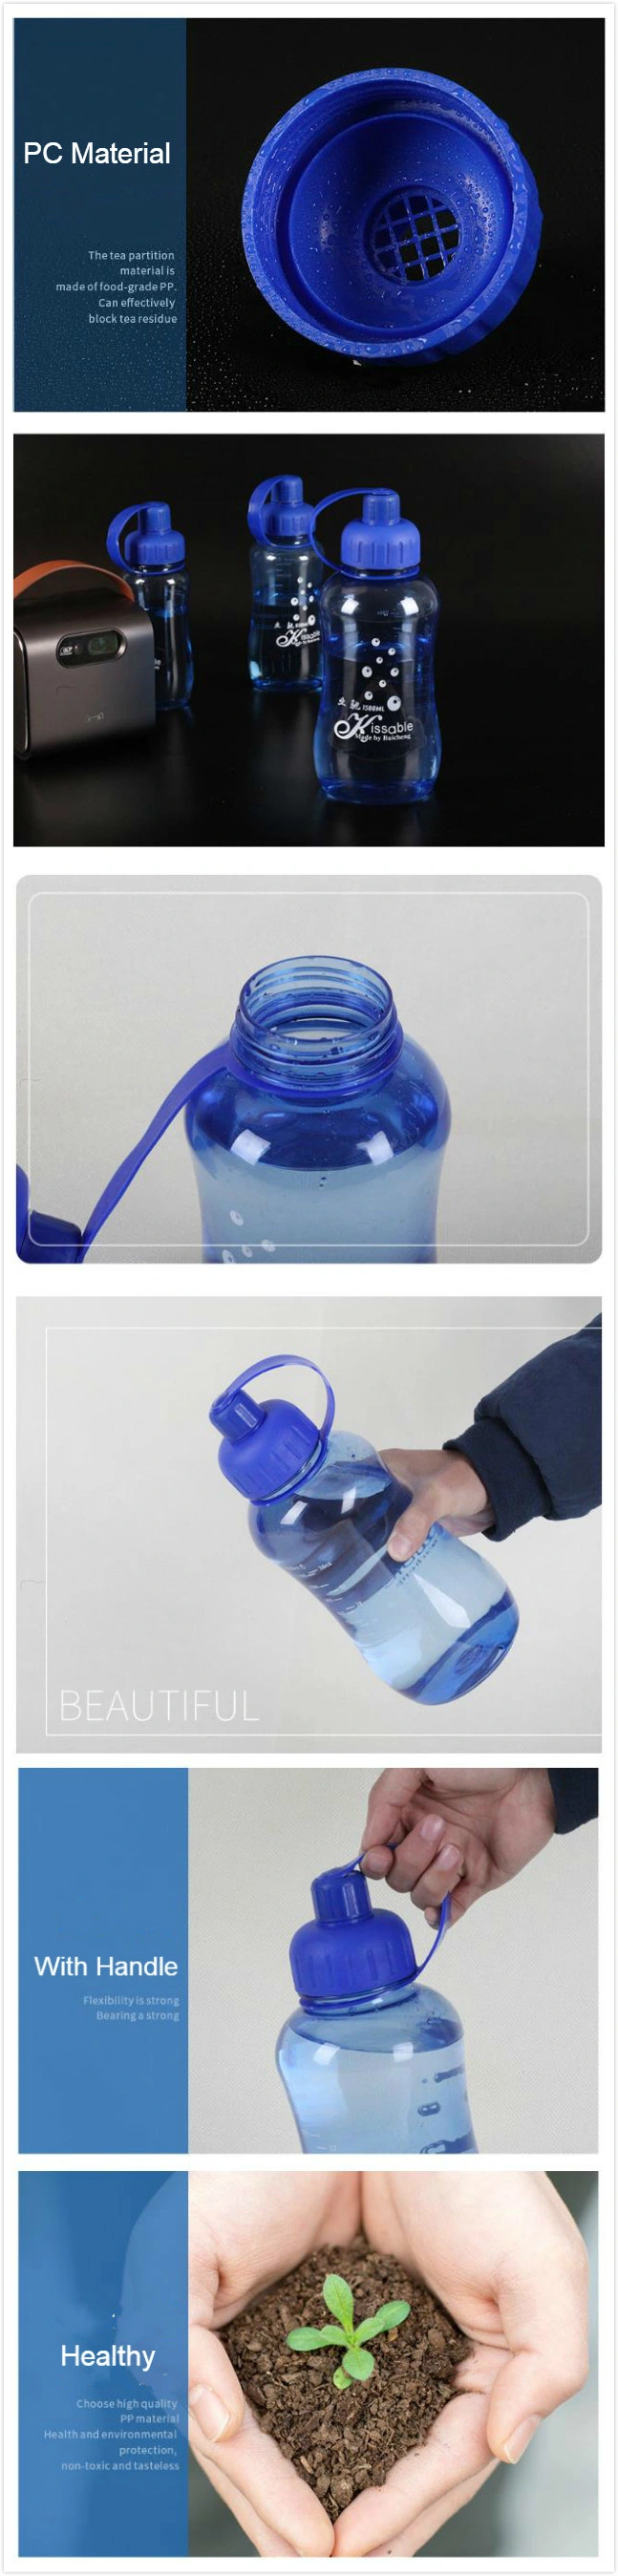 Large Capacity BPA Free Plastic Water Bottle Travel Portable Plastic Water Cup